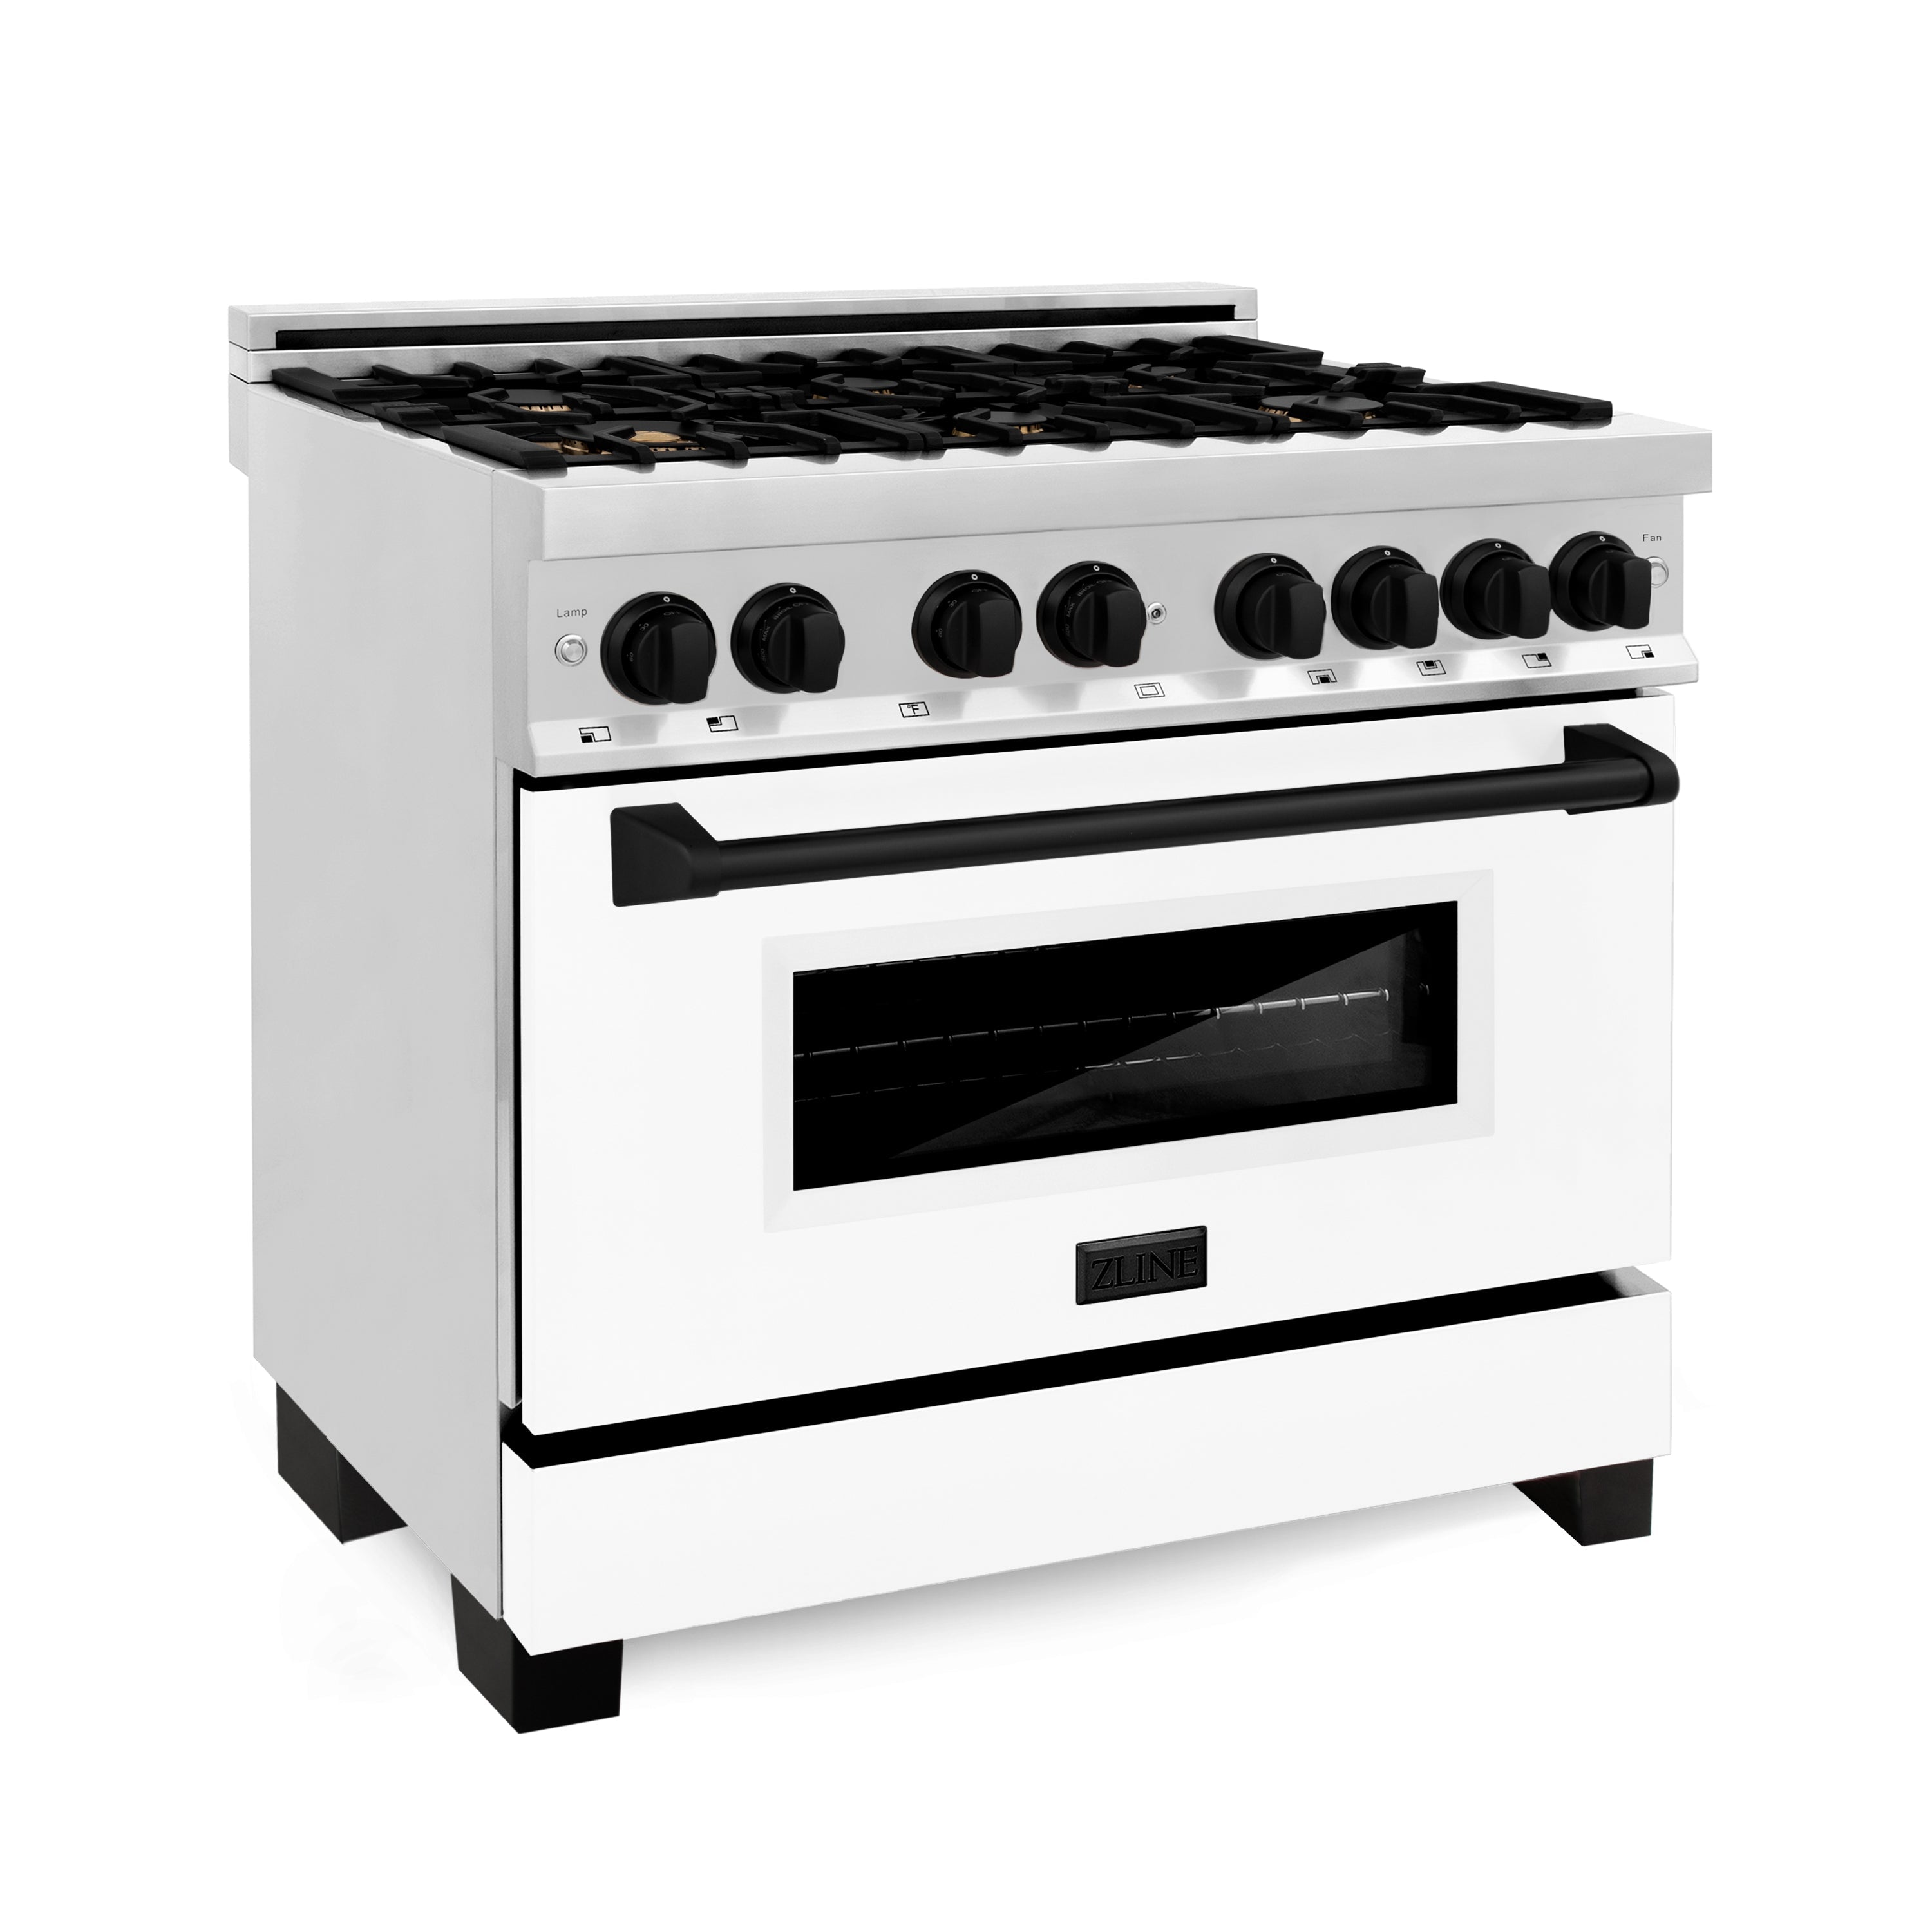 ZLINE Autograph Edition 36" 4.6 cu. ft. Dual Fuel Range with Gas Stove and Electric Oven in Stainless Steel with White Matte Door and Accents (RAZ-WM-36) - New Star Living